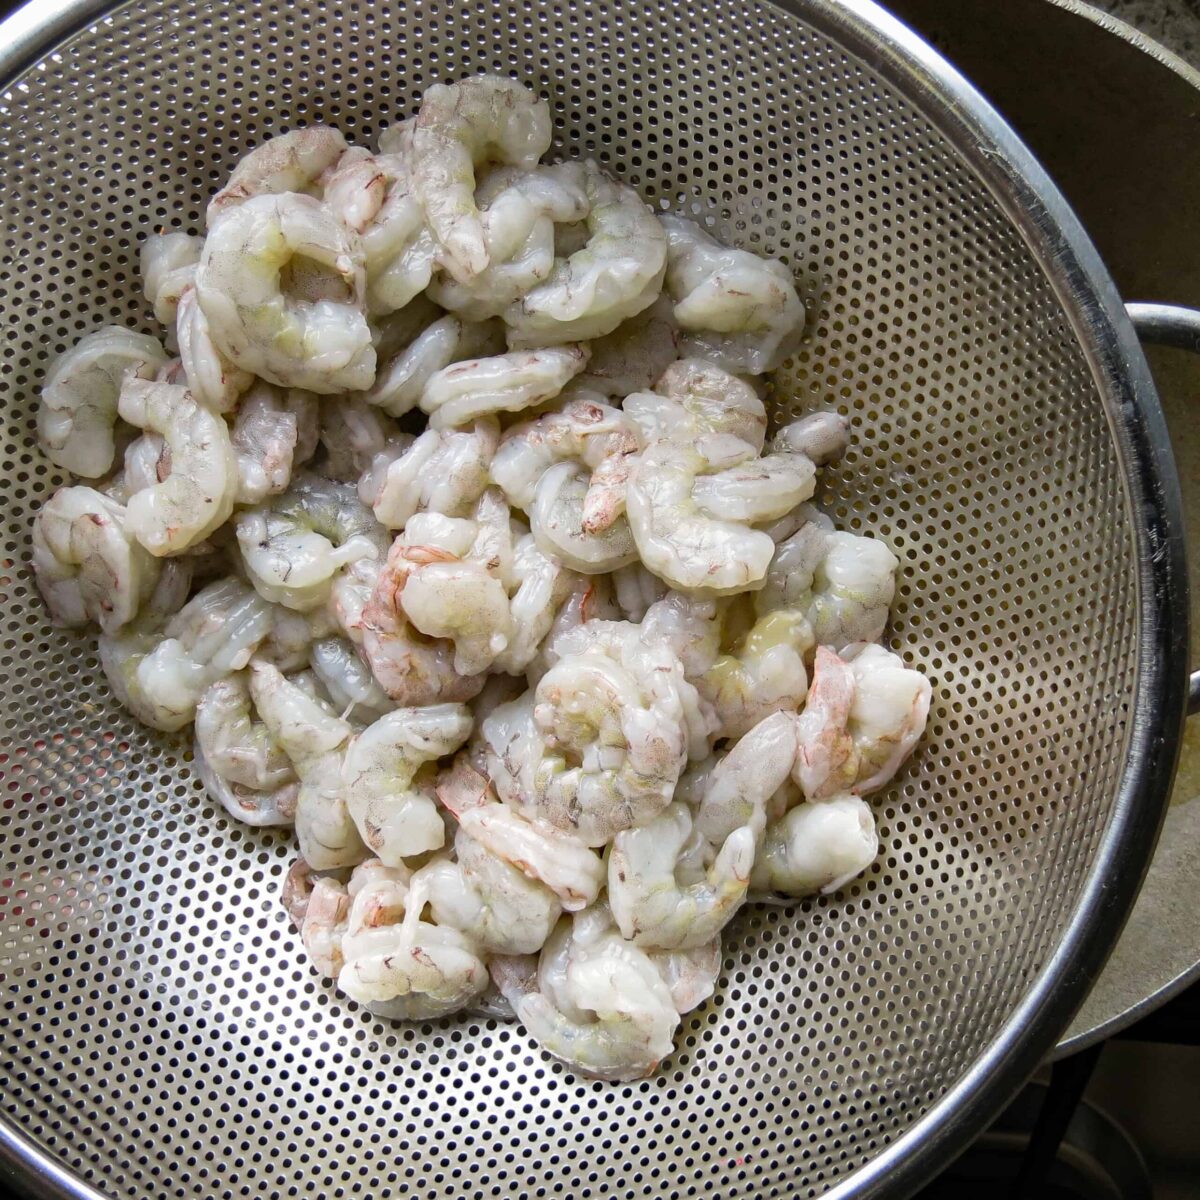 A silver drainer with fresh shrimp in it.